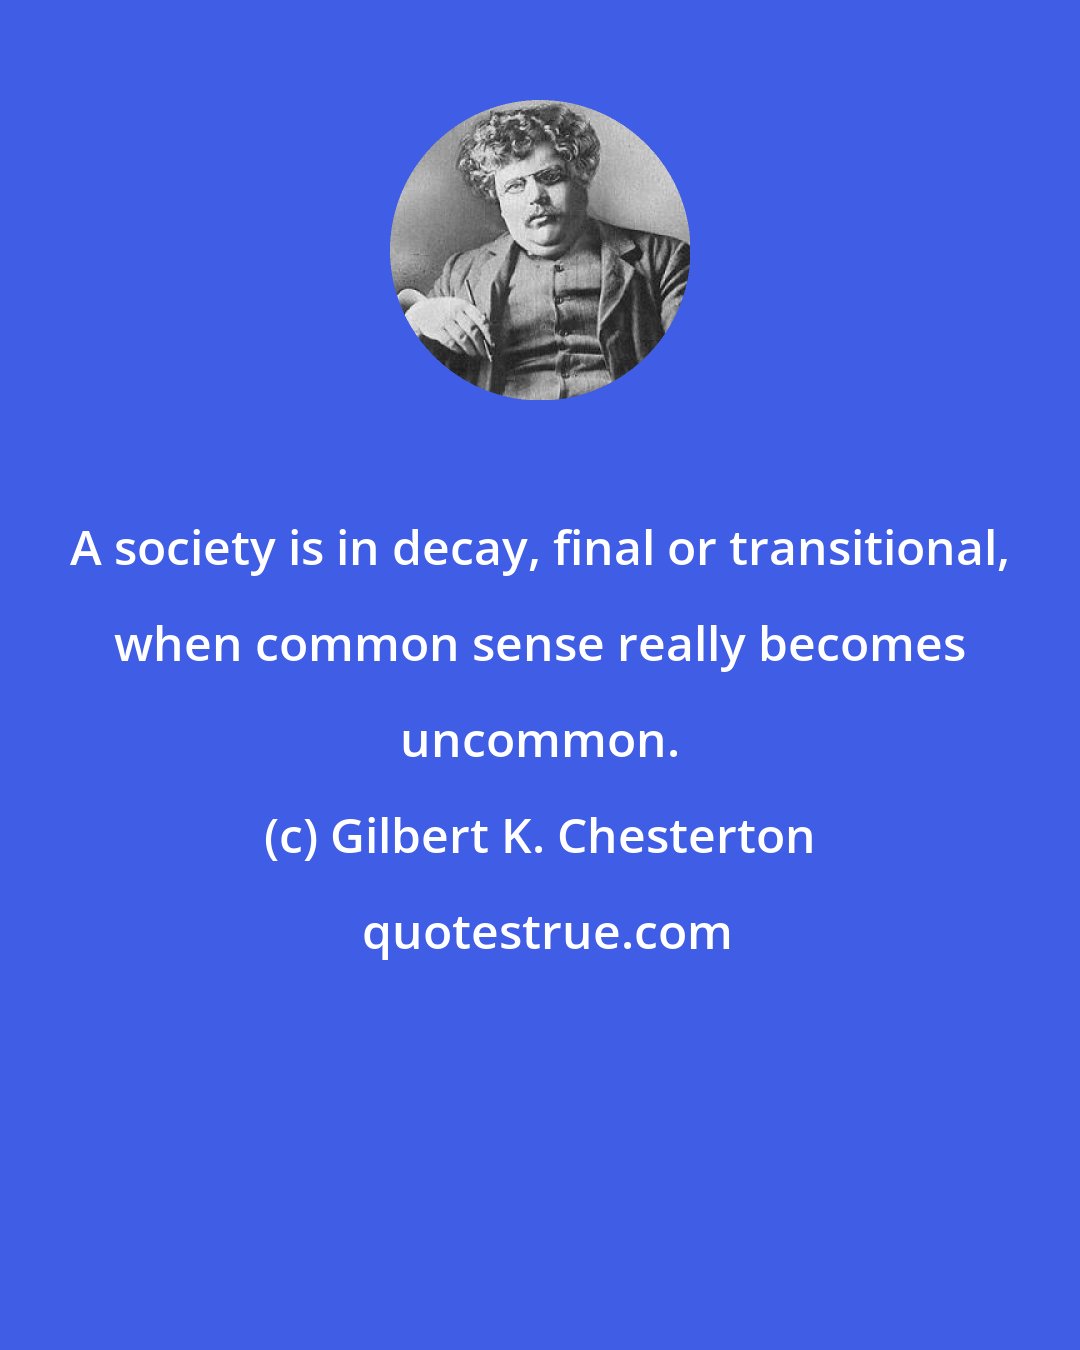 Gilbert K. Chesterton: A society is in decay, final or transitional, when common sense really becomes uncommon.